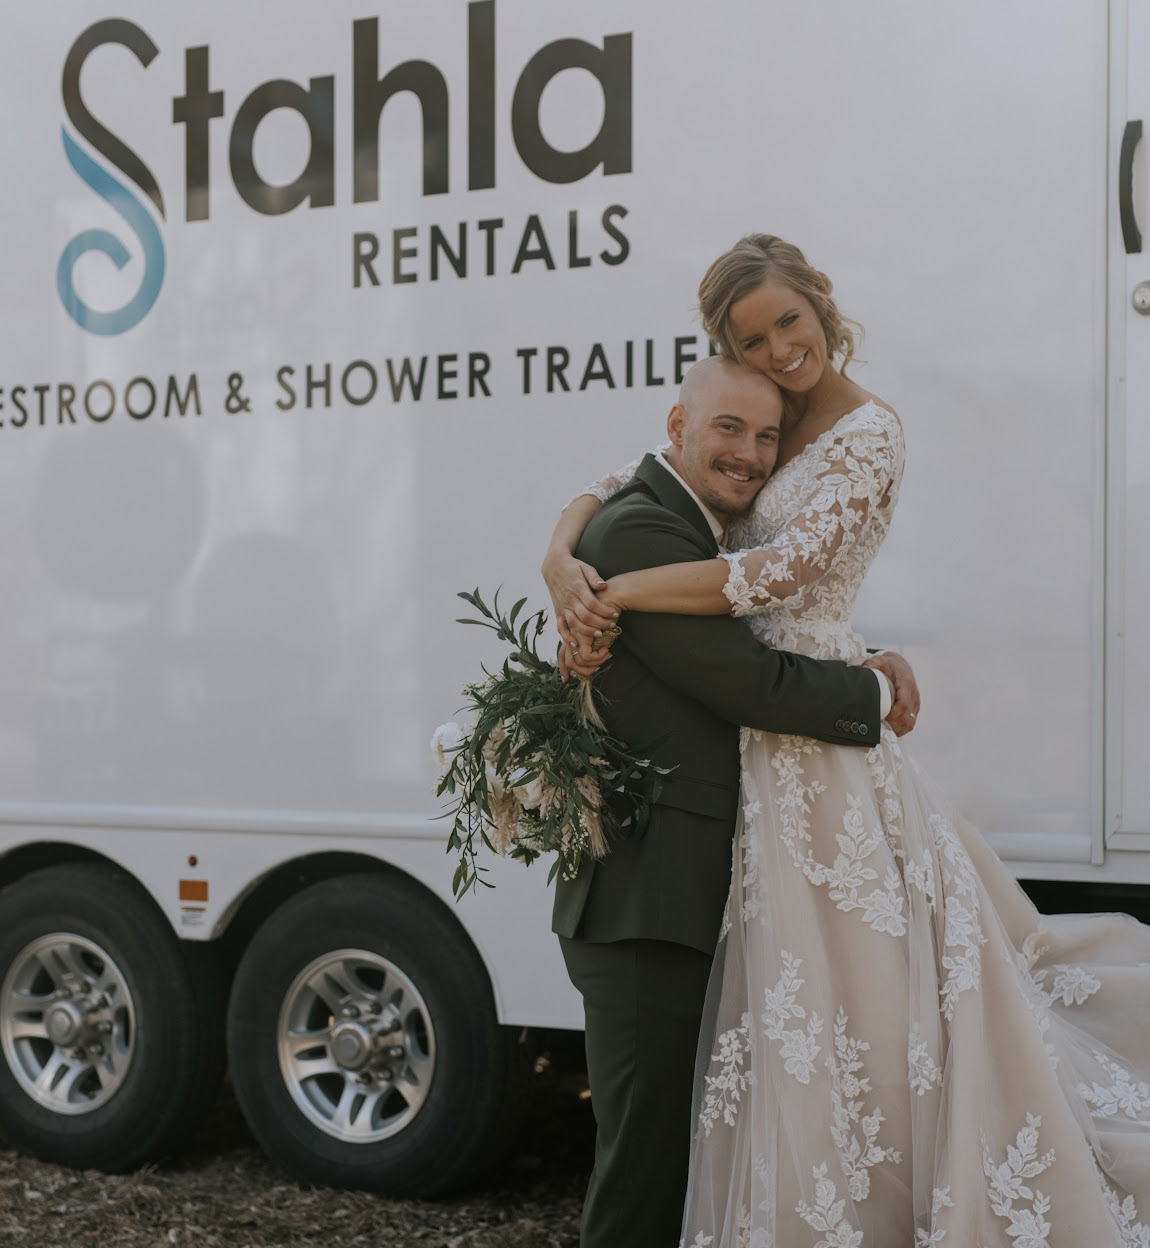 Shower and Restroom Trailer Rentals 1683141587 Screenshot 2023 05 01 at 11.27.24 AM - Discover the Benefits of a 4 Station Restroom Trailer for Your Event!